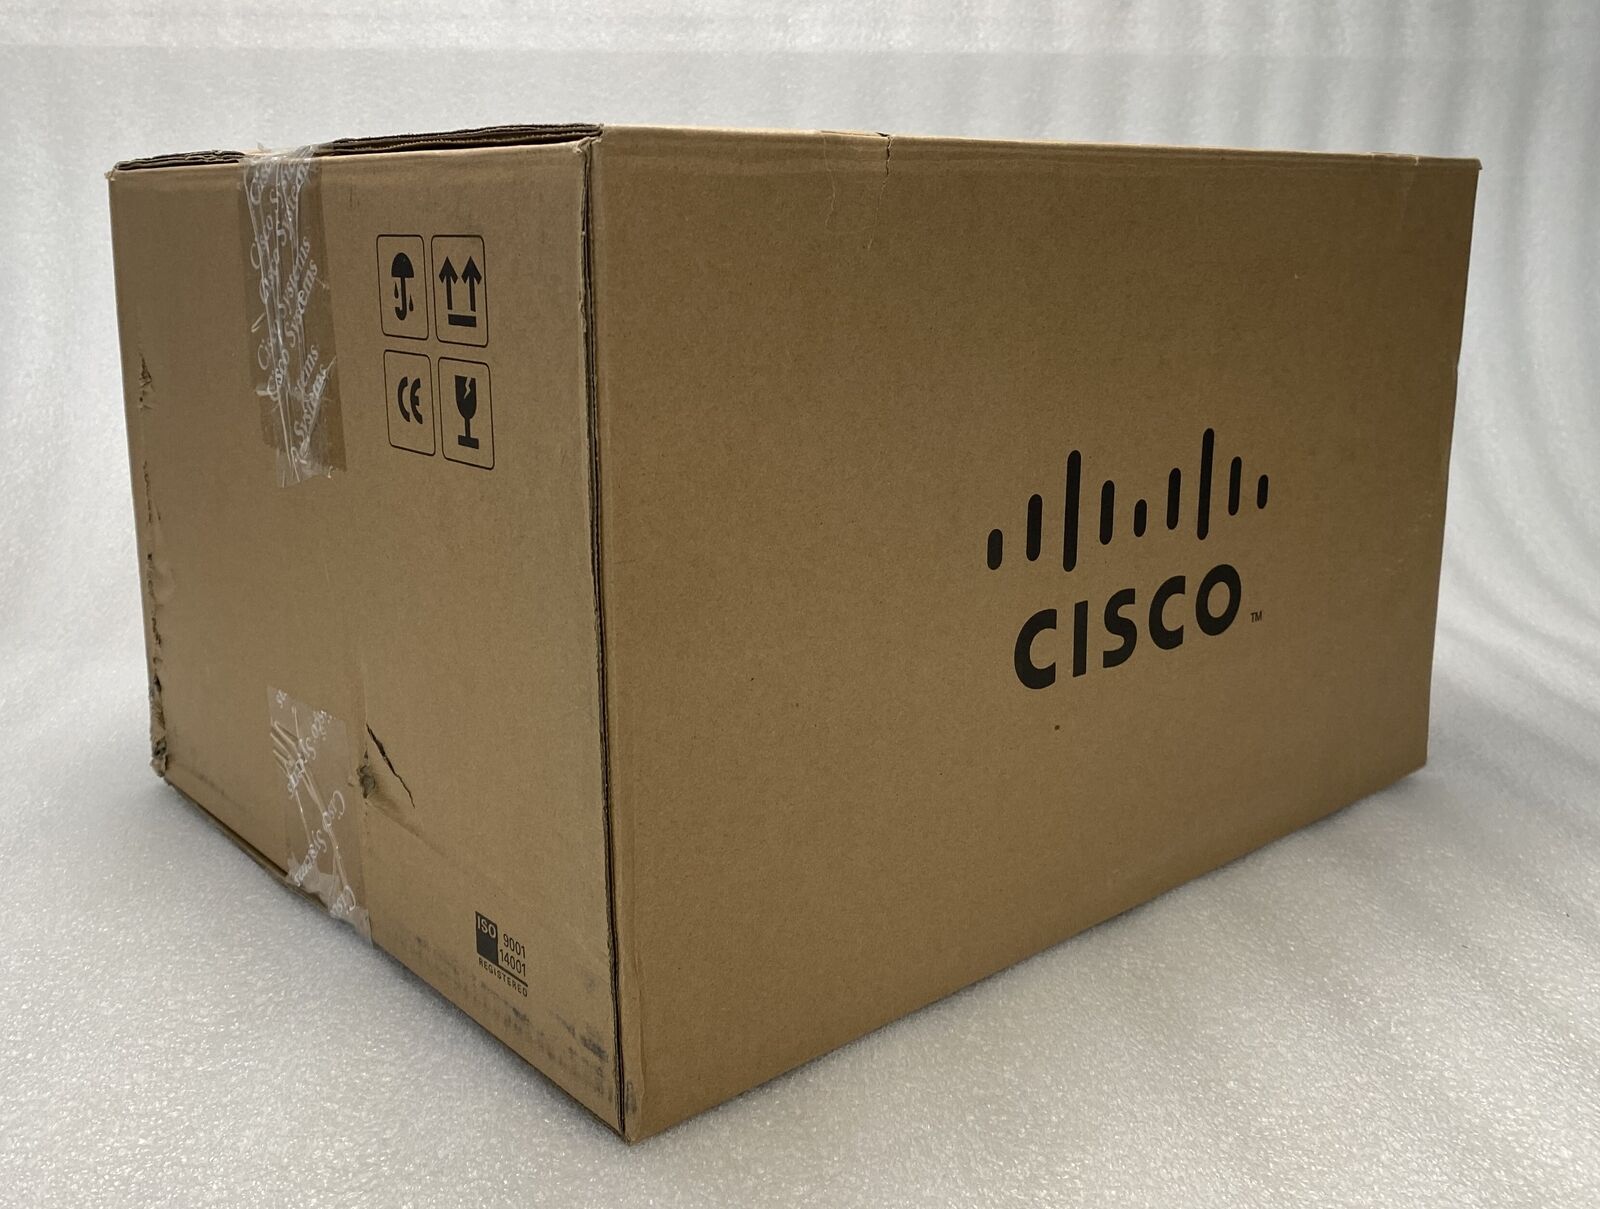 Lot of 10 Cisco 7800 Series Wall Mount Kit for 7821/7841 CP-7800-WMK